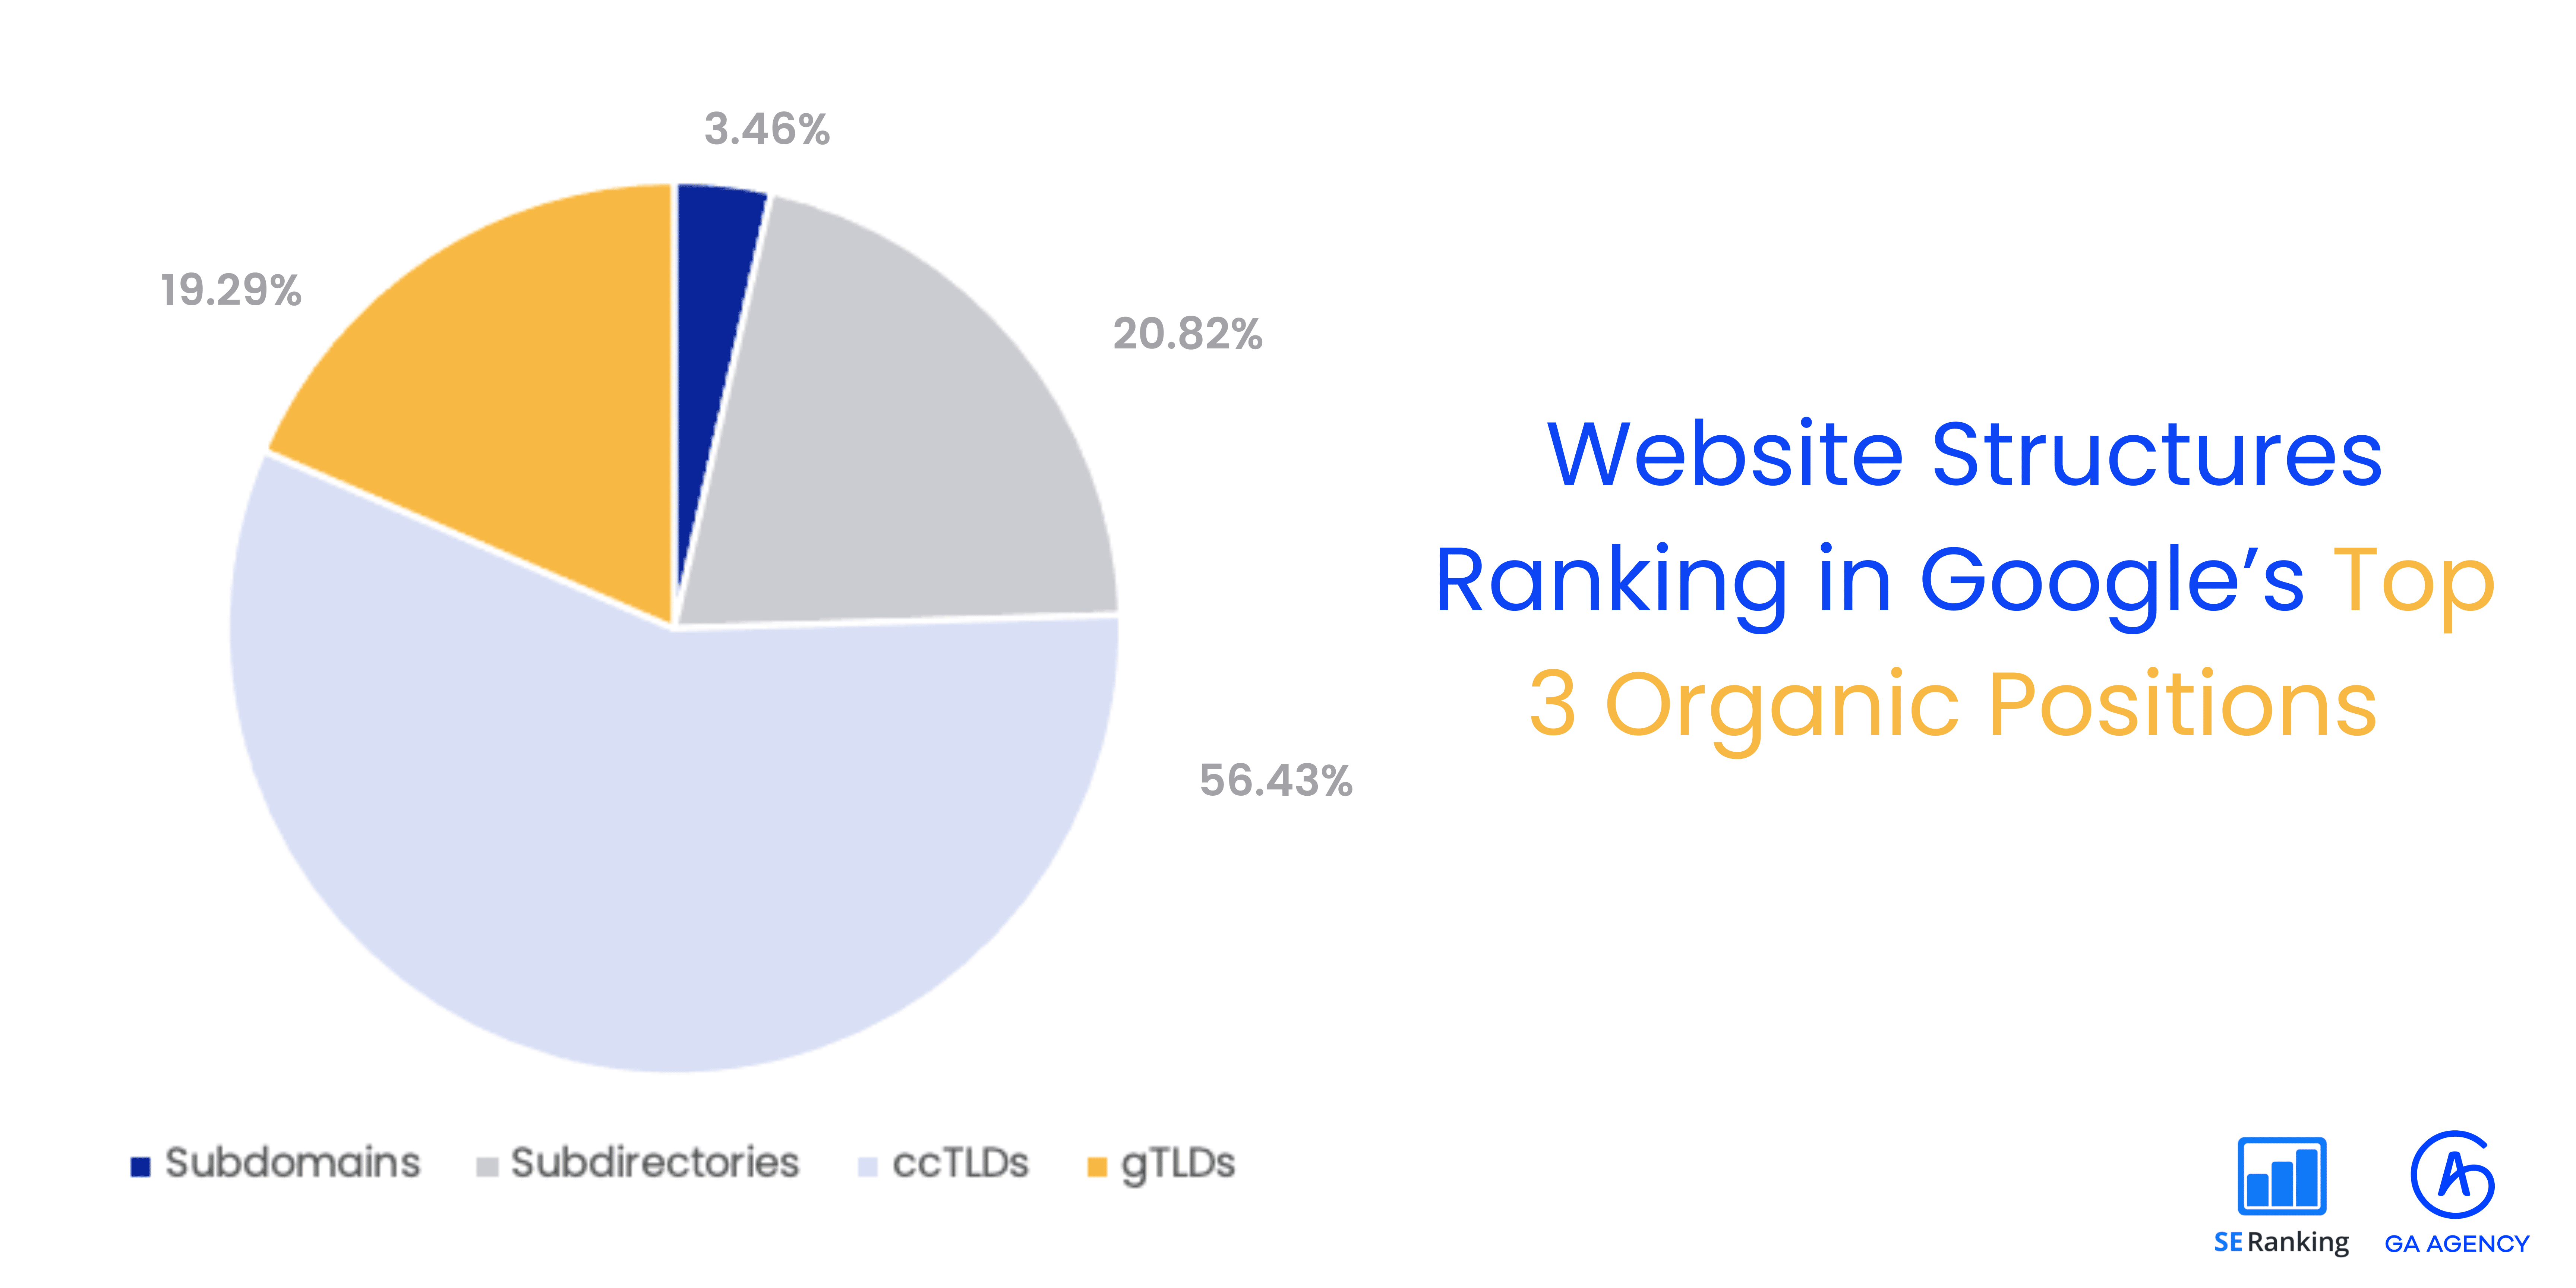 Subdomains or Subdirectories? SE Ranking and GA Agency Partnered to Discover the Truth